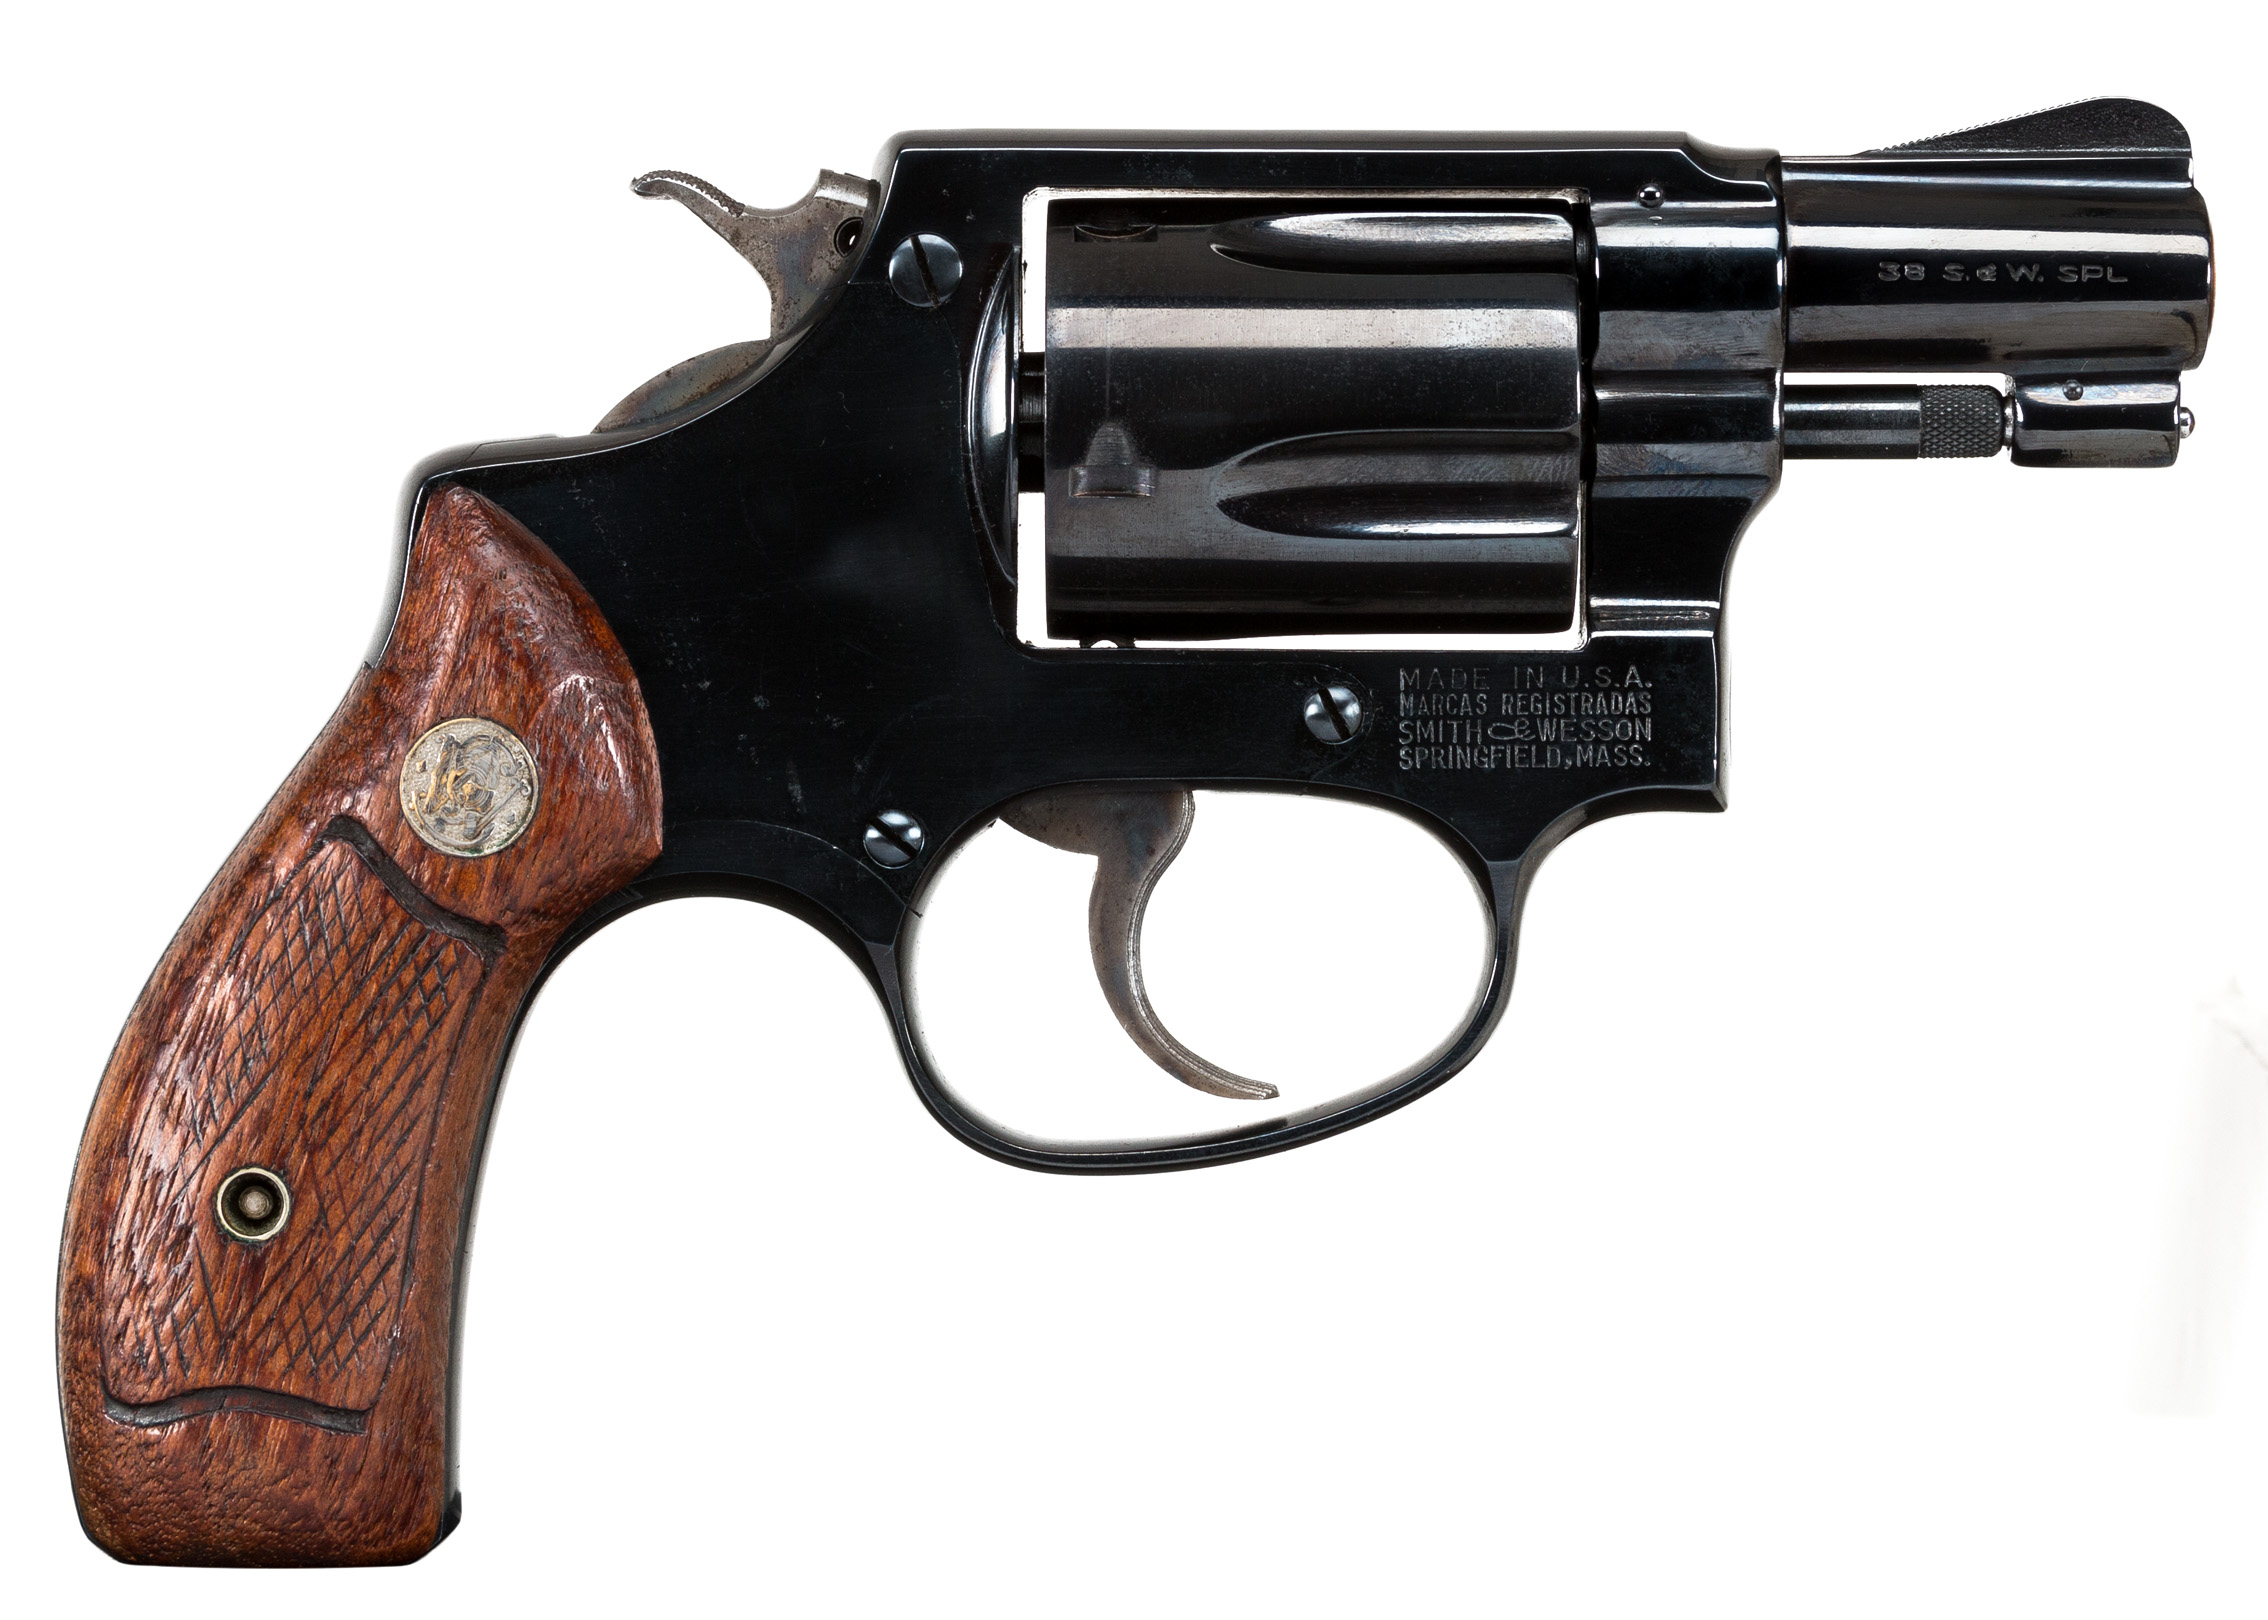 Smith and wesson serial num